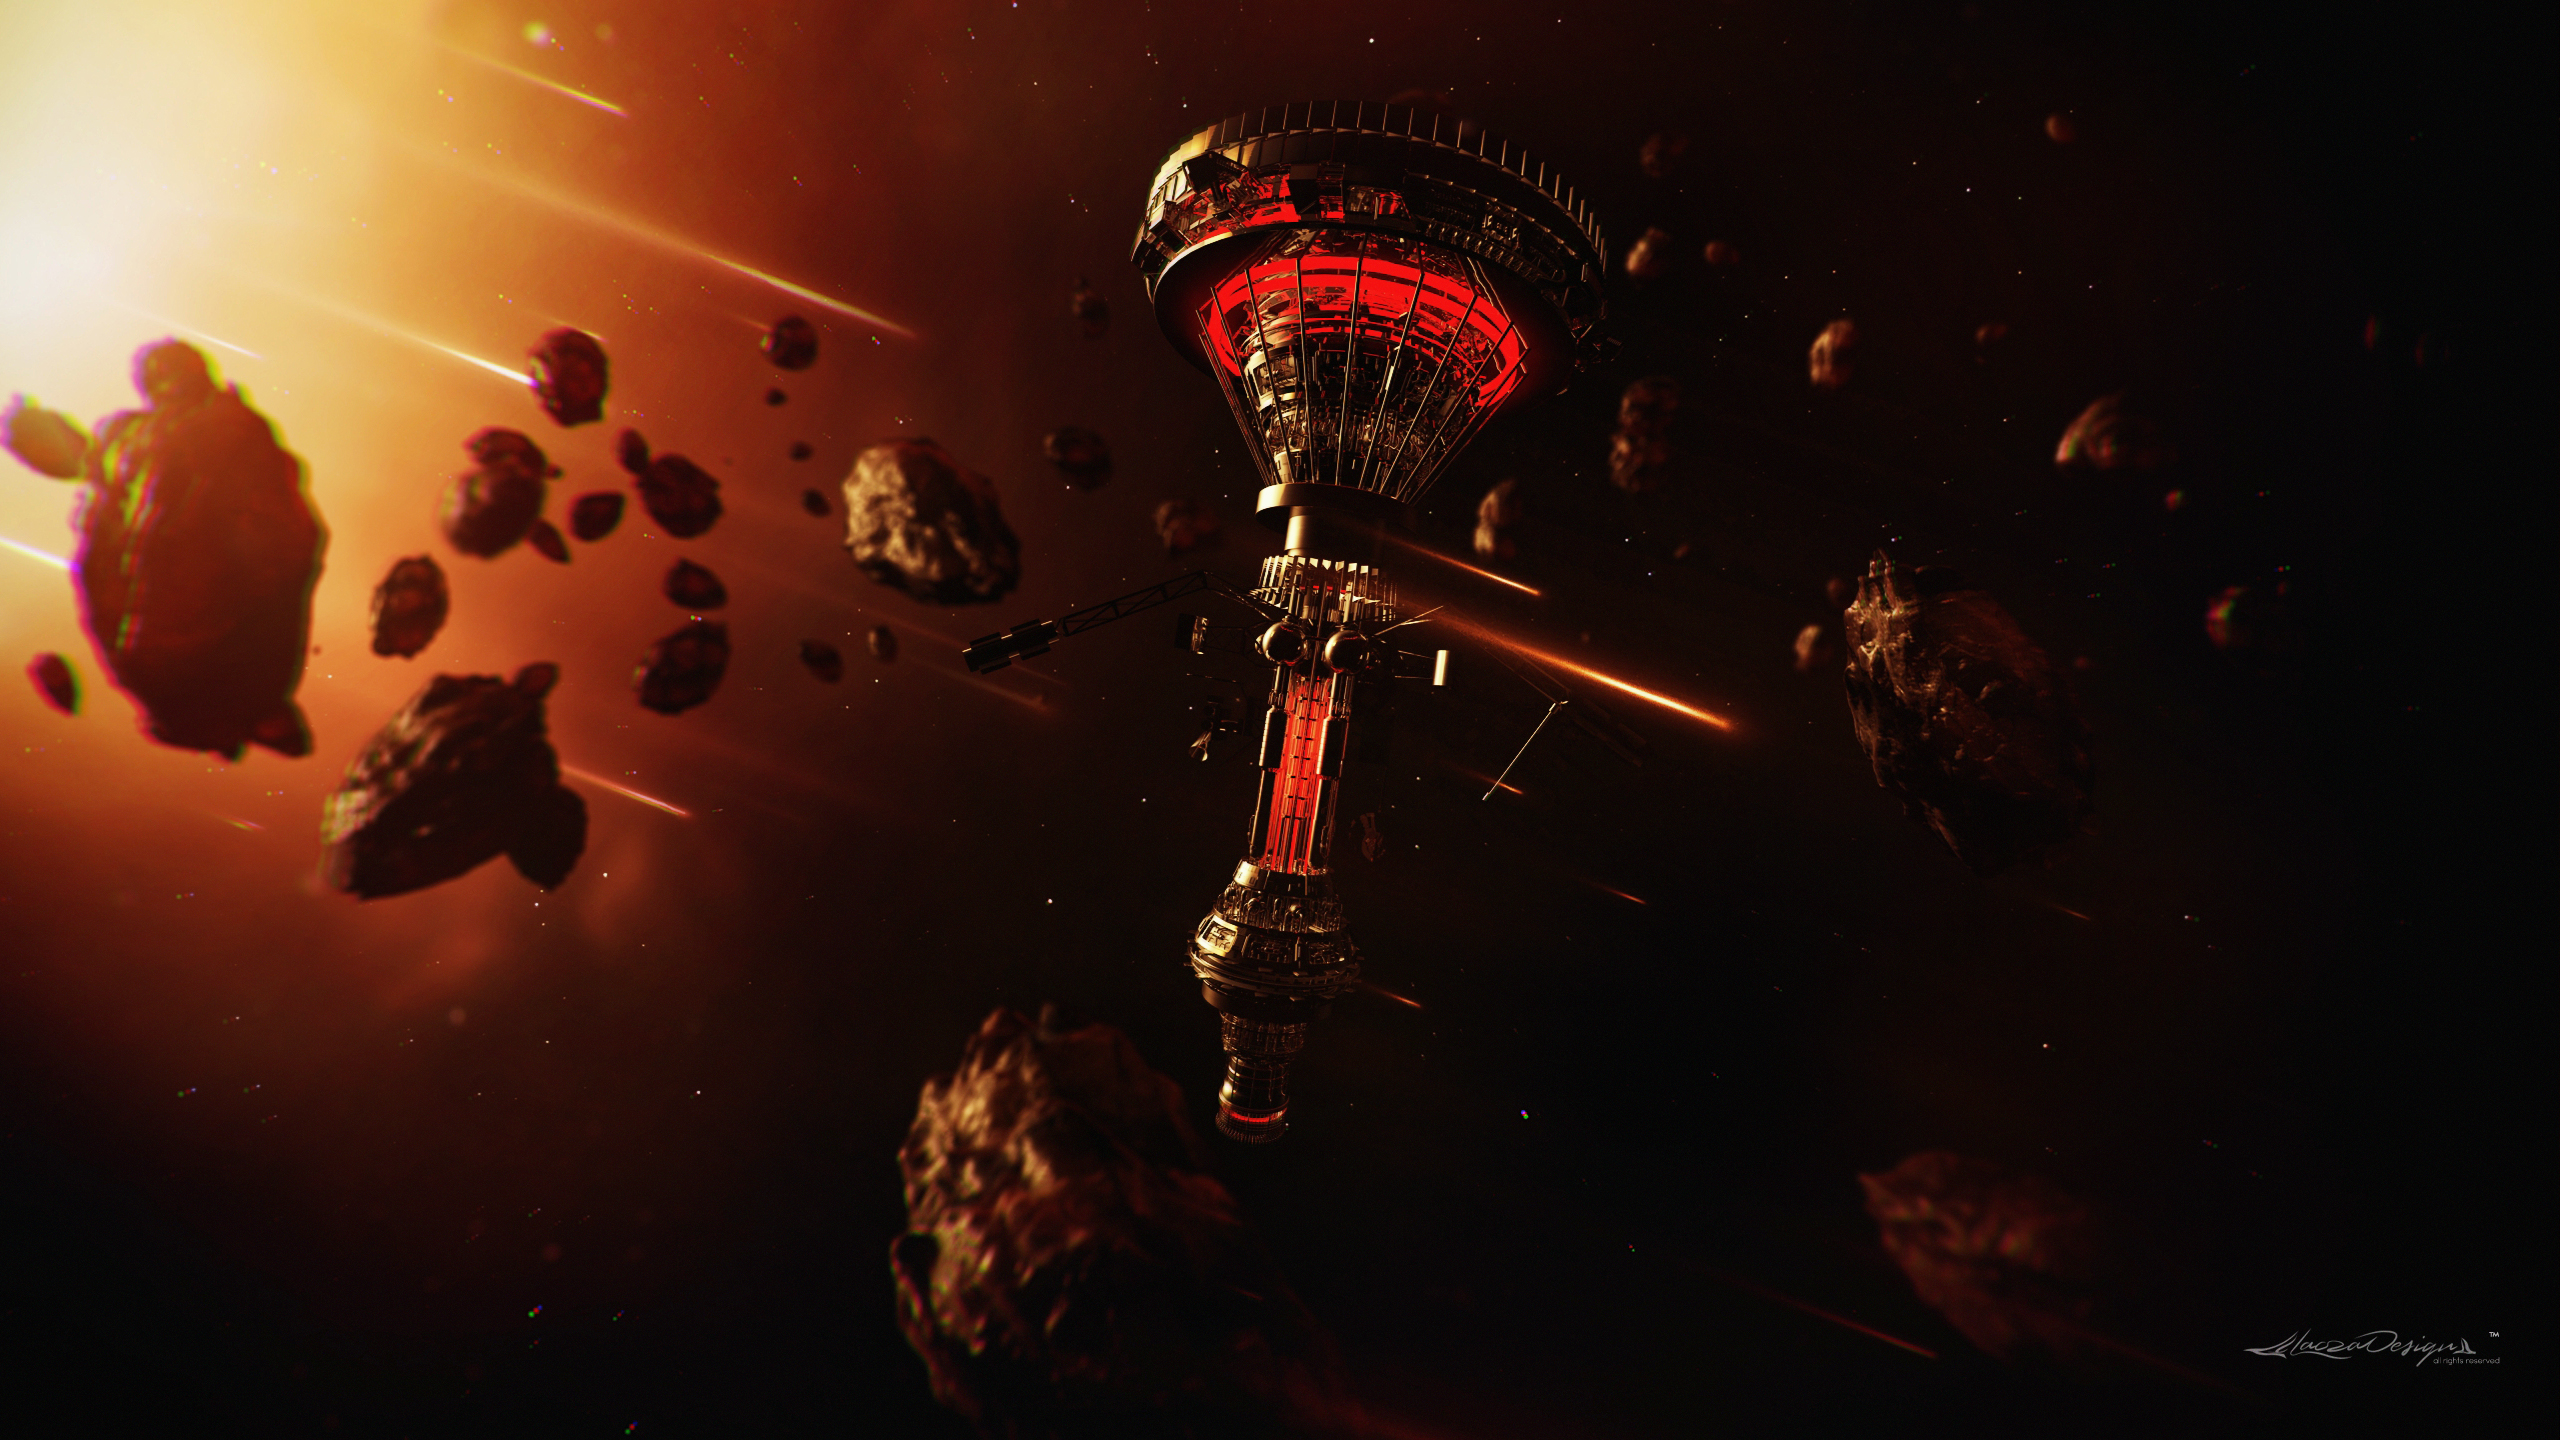 Digital Art Asteroid Space Space Art Comet Space Station Science Fiction Glowing Lacza Mass Effect 2 2560x1440